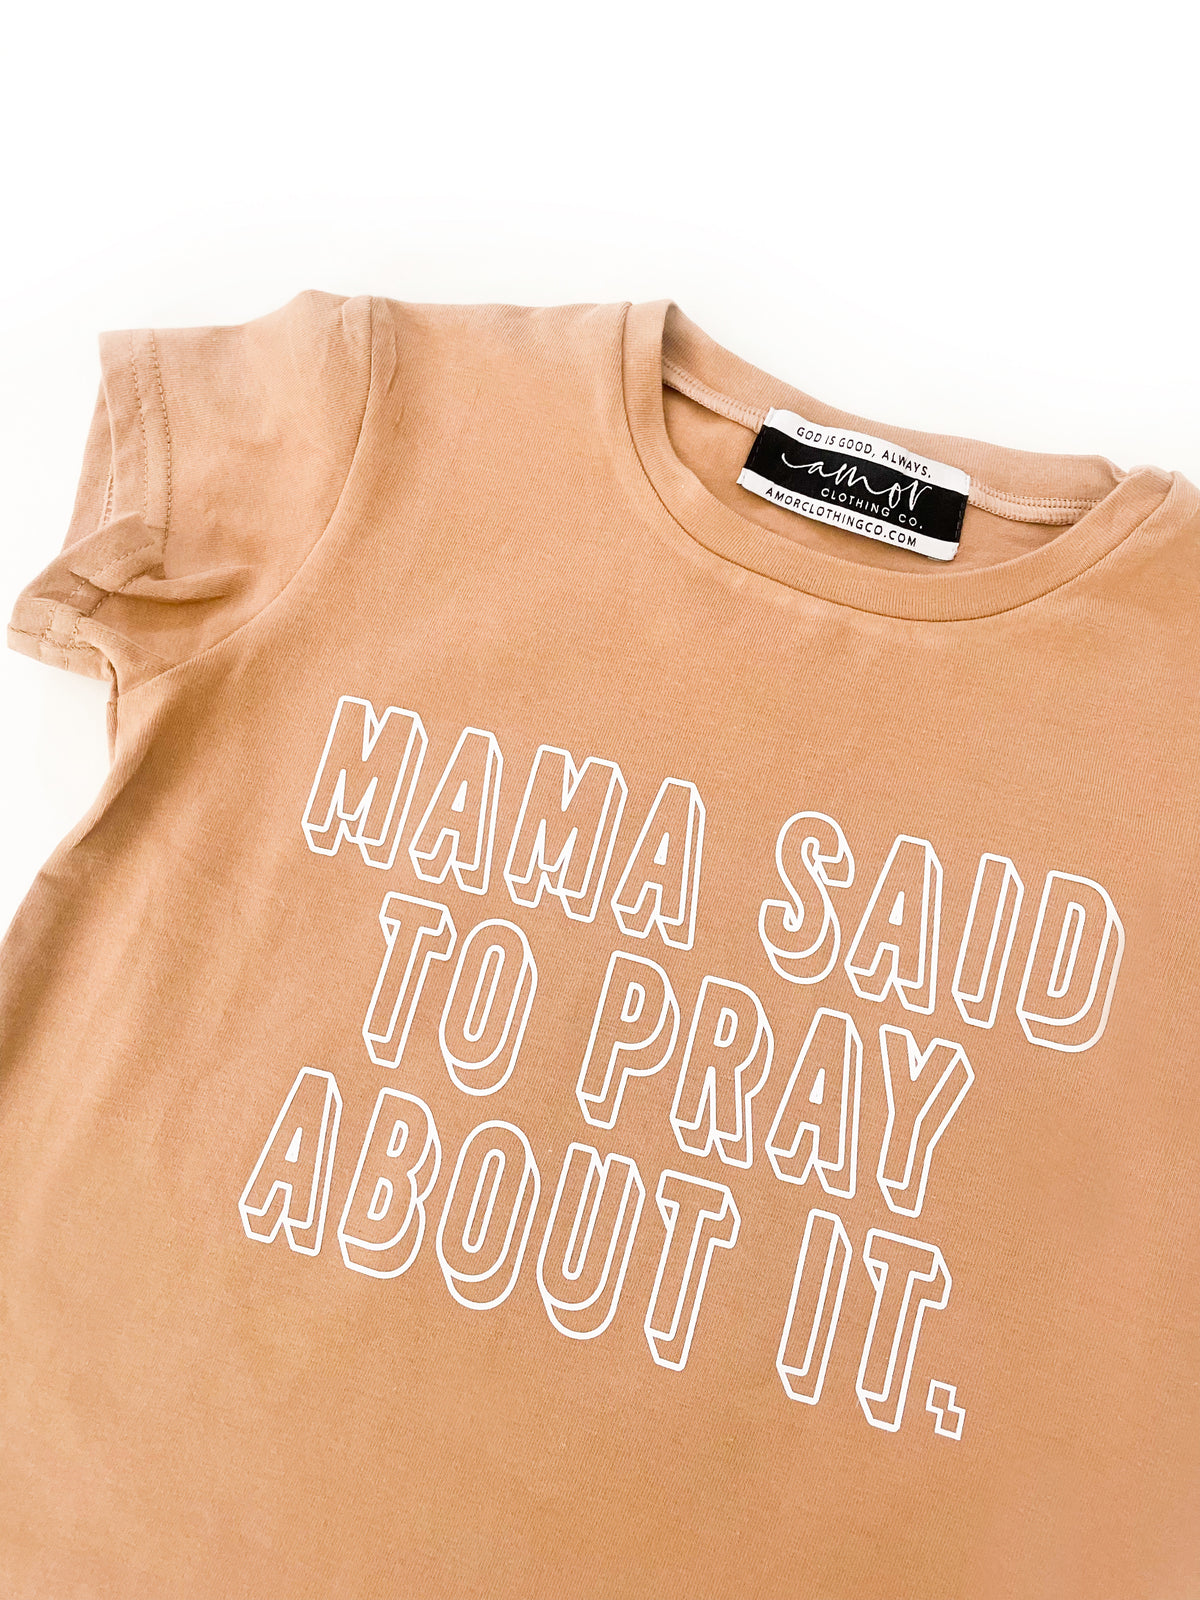 Mama Said To Pray About It Tee